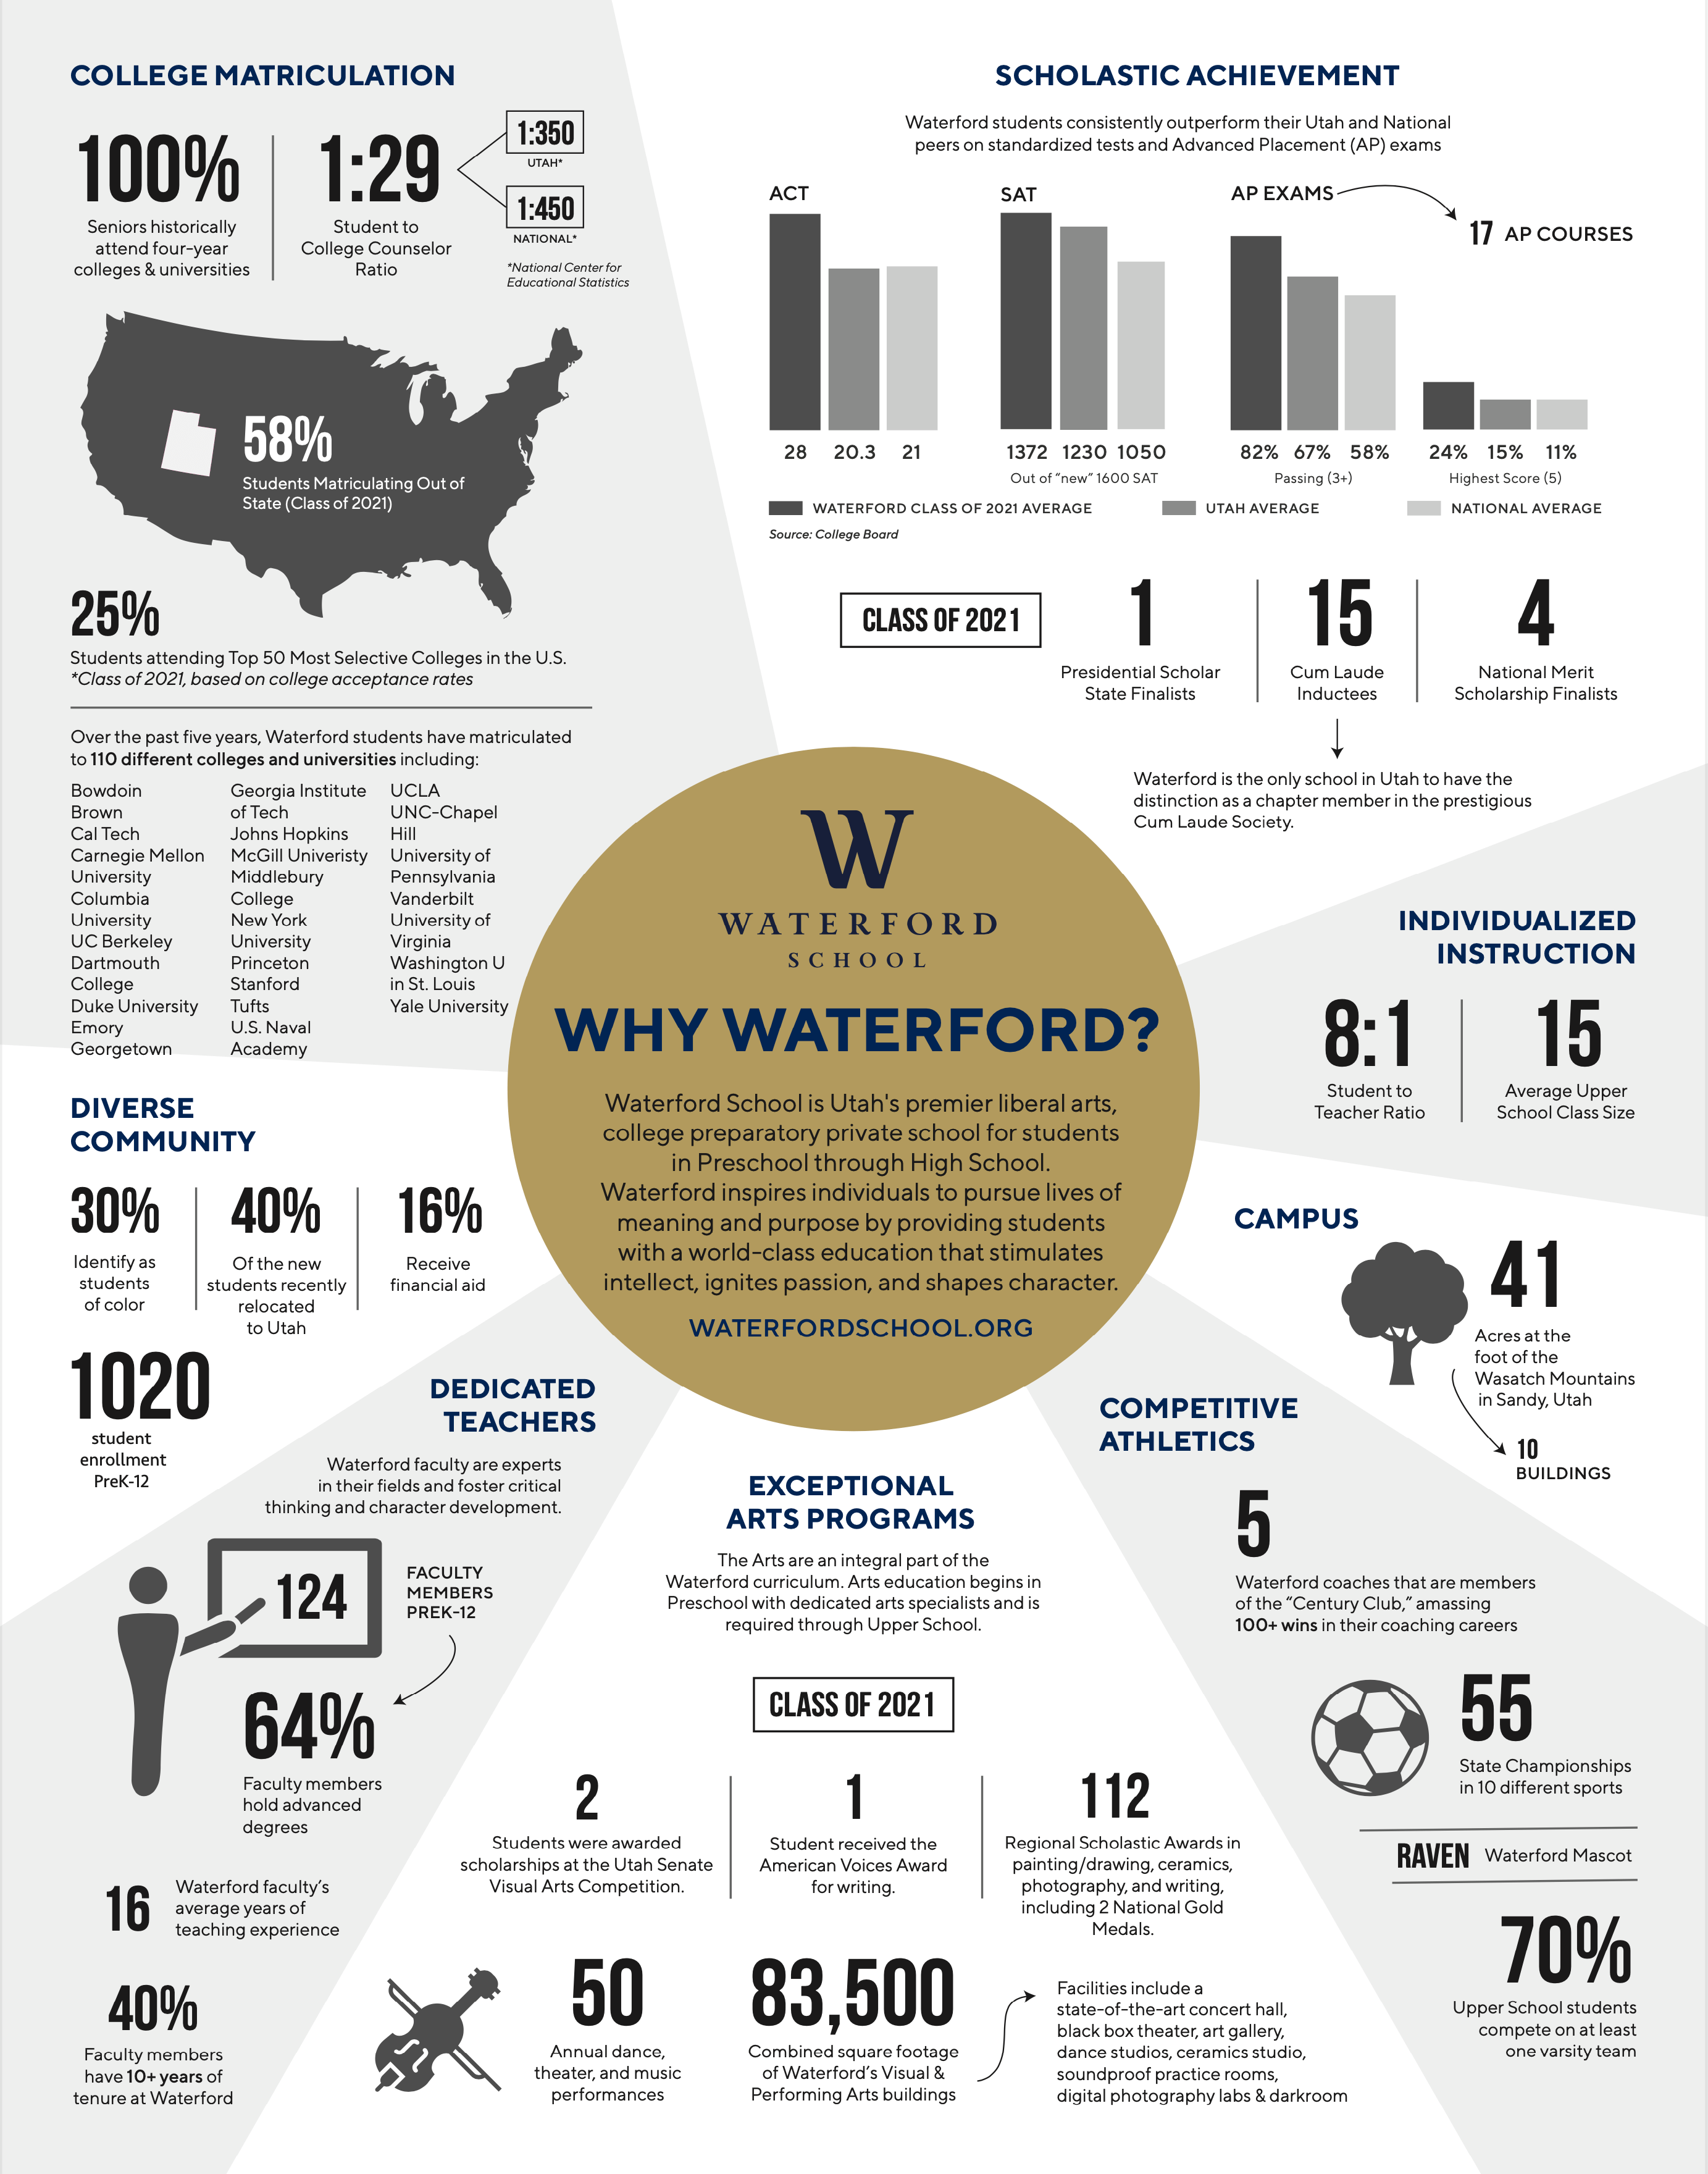 Why Waterford 2021-22 Infographic